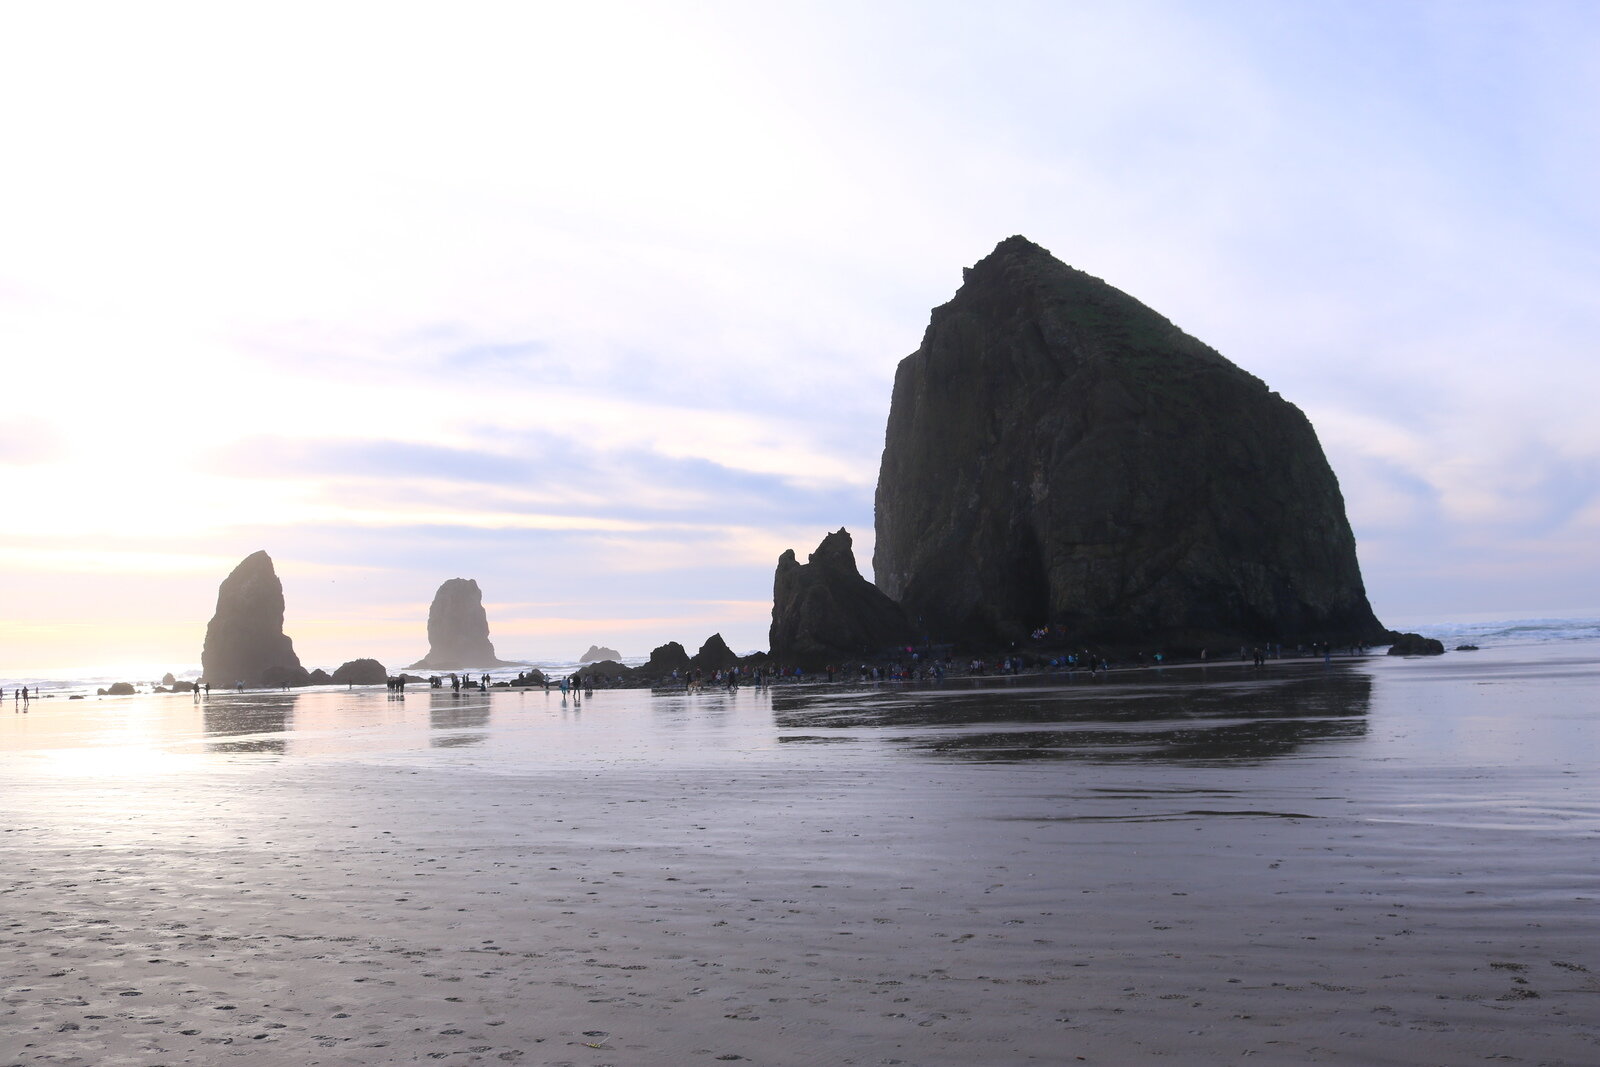 Haystack Rock on Cannon Beach - a large dark rock on the beach at low tide, the ocean is in th distance and the sand is shiny with the sun reflection